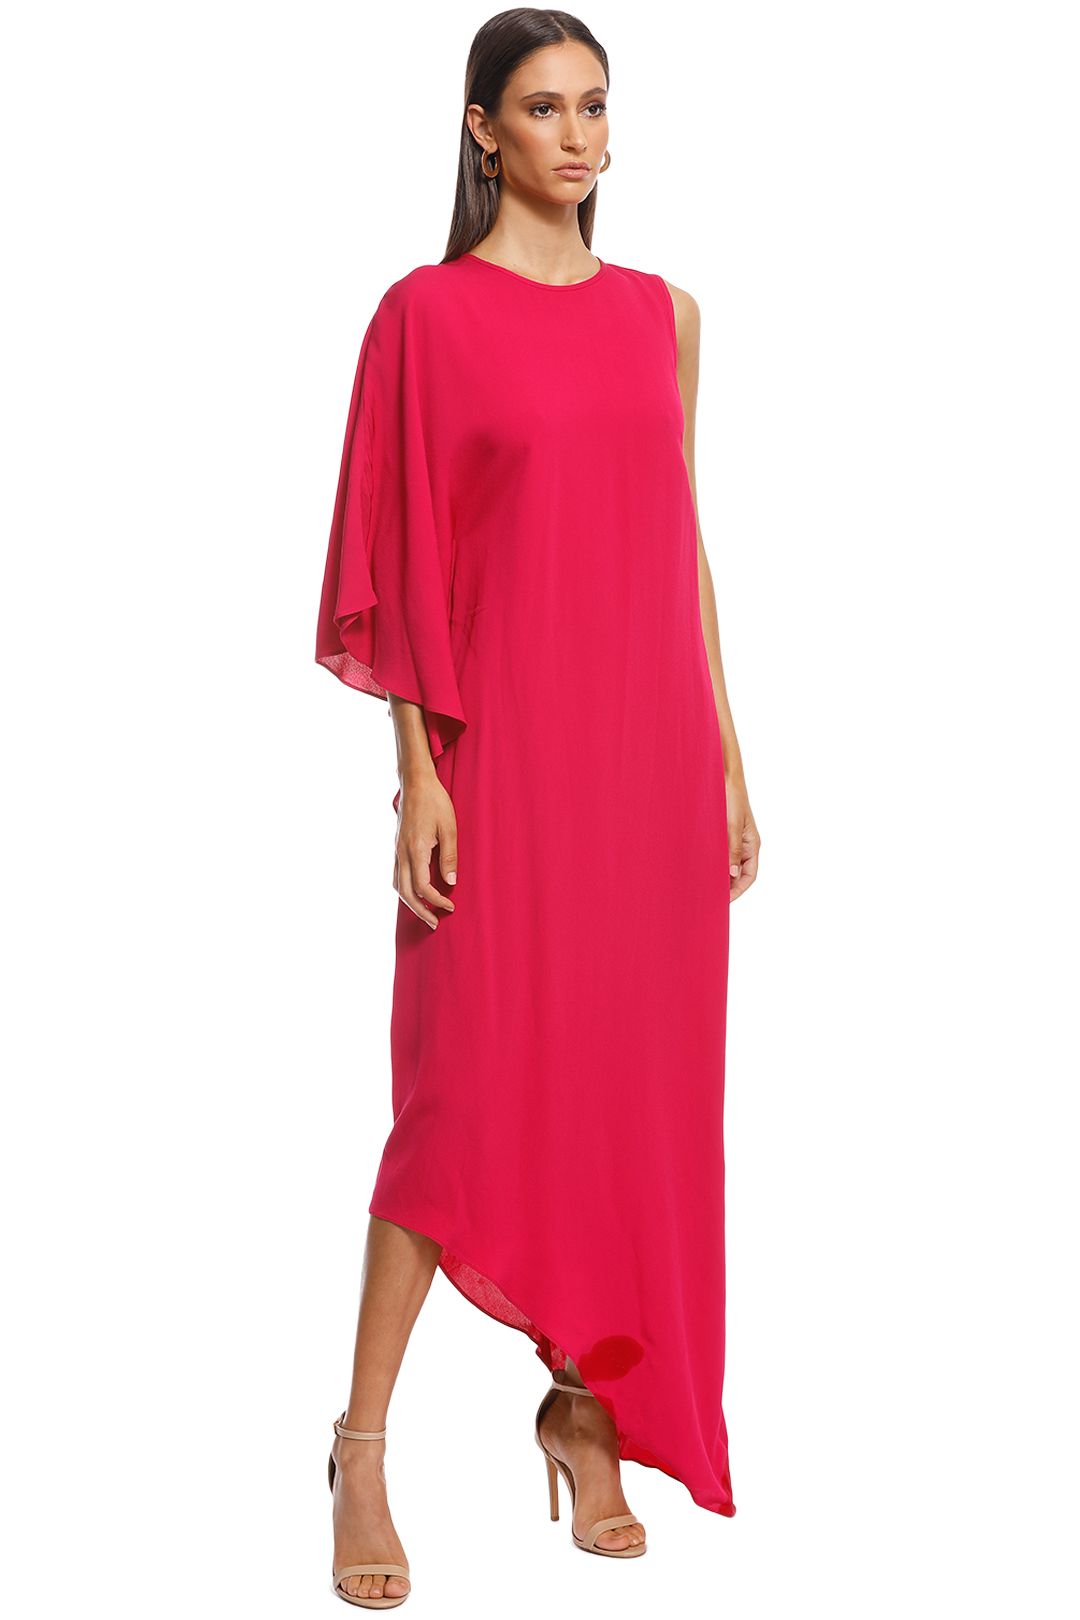 Ginger and Smart - Stasis Maxi Dress - Pink - Side B